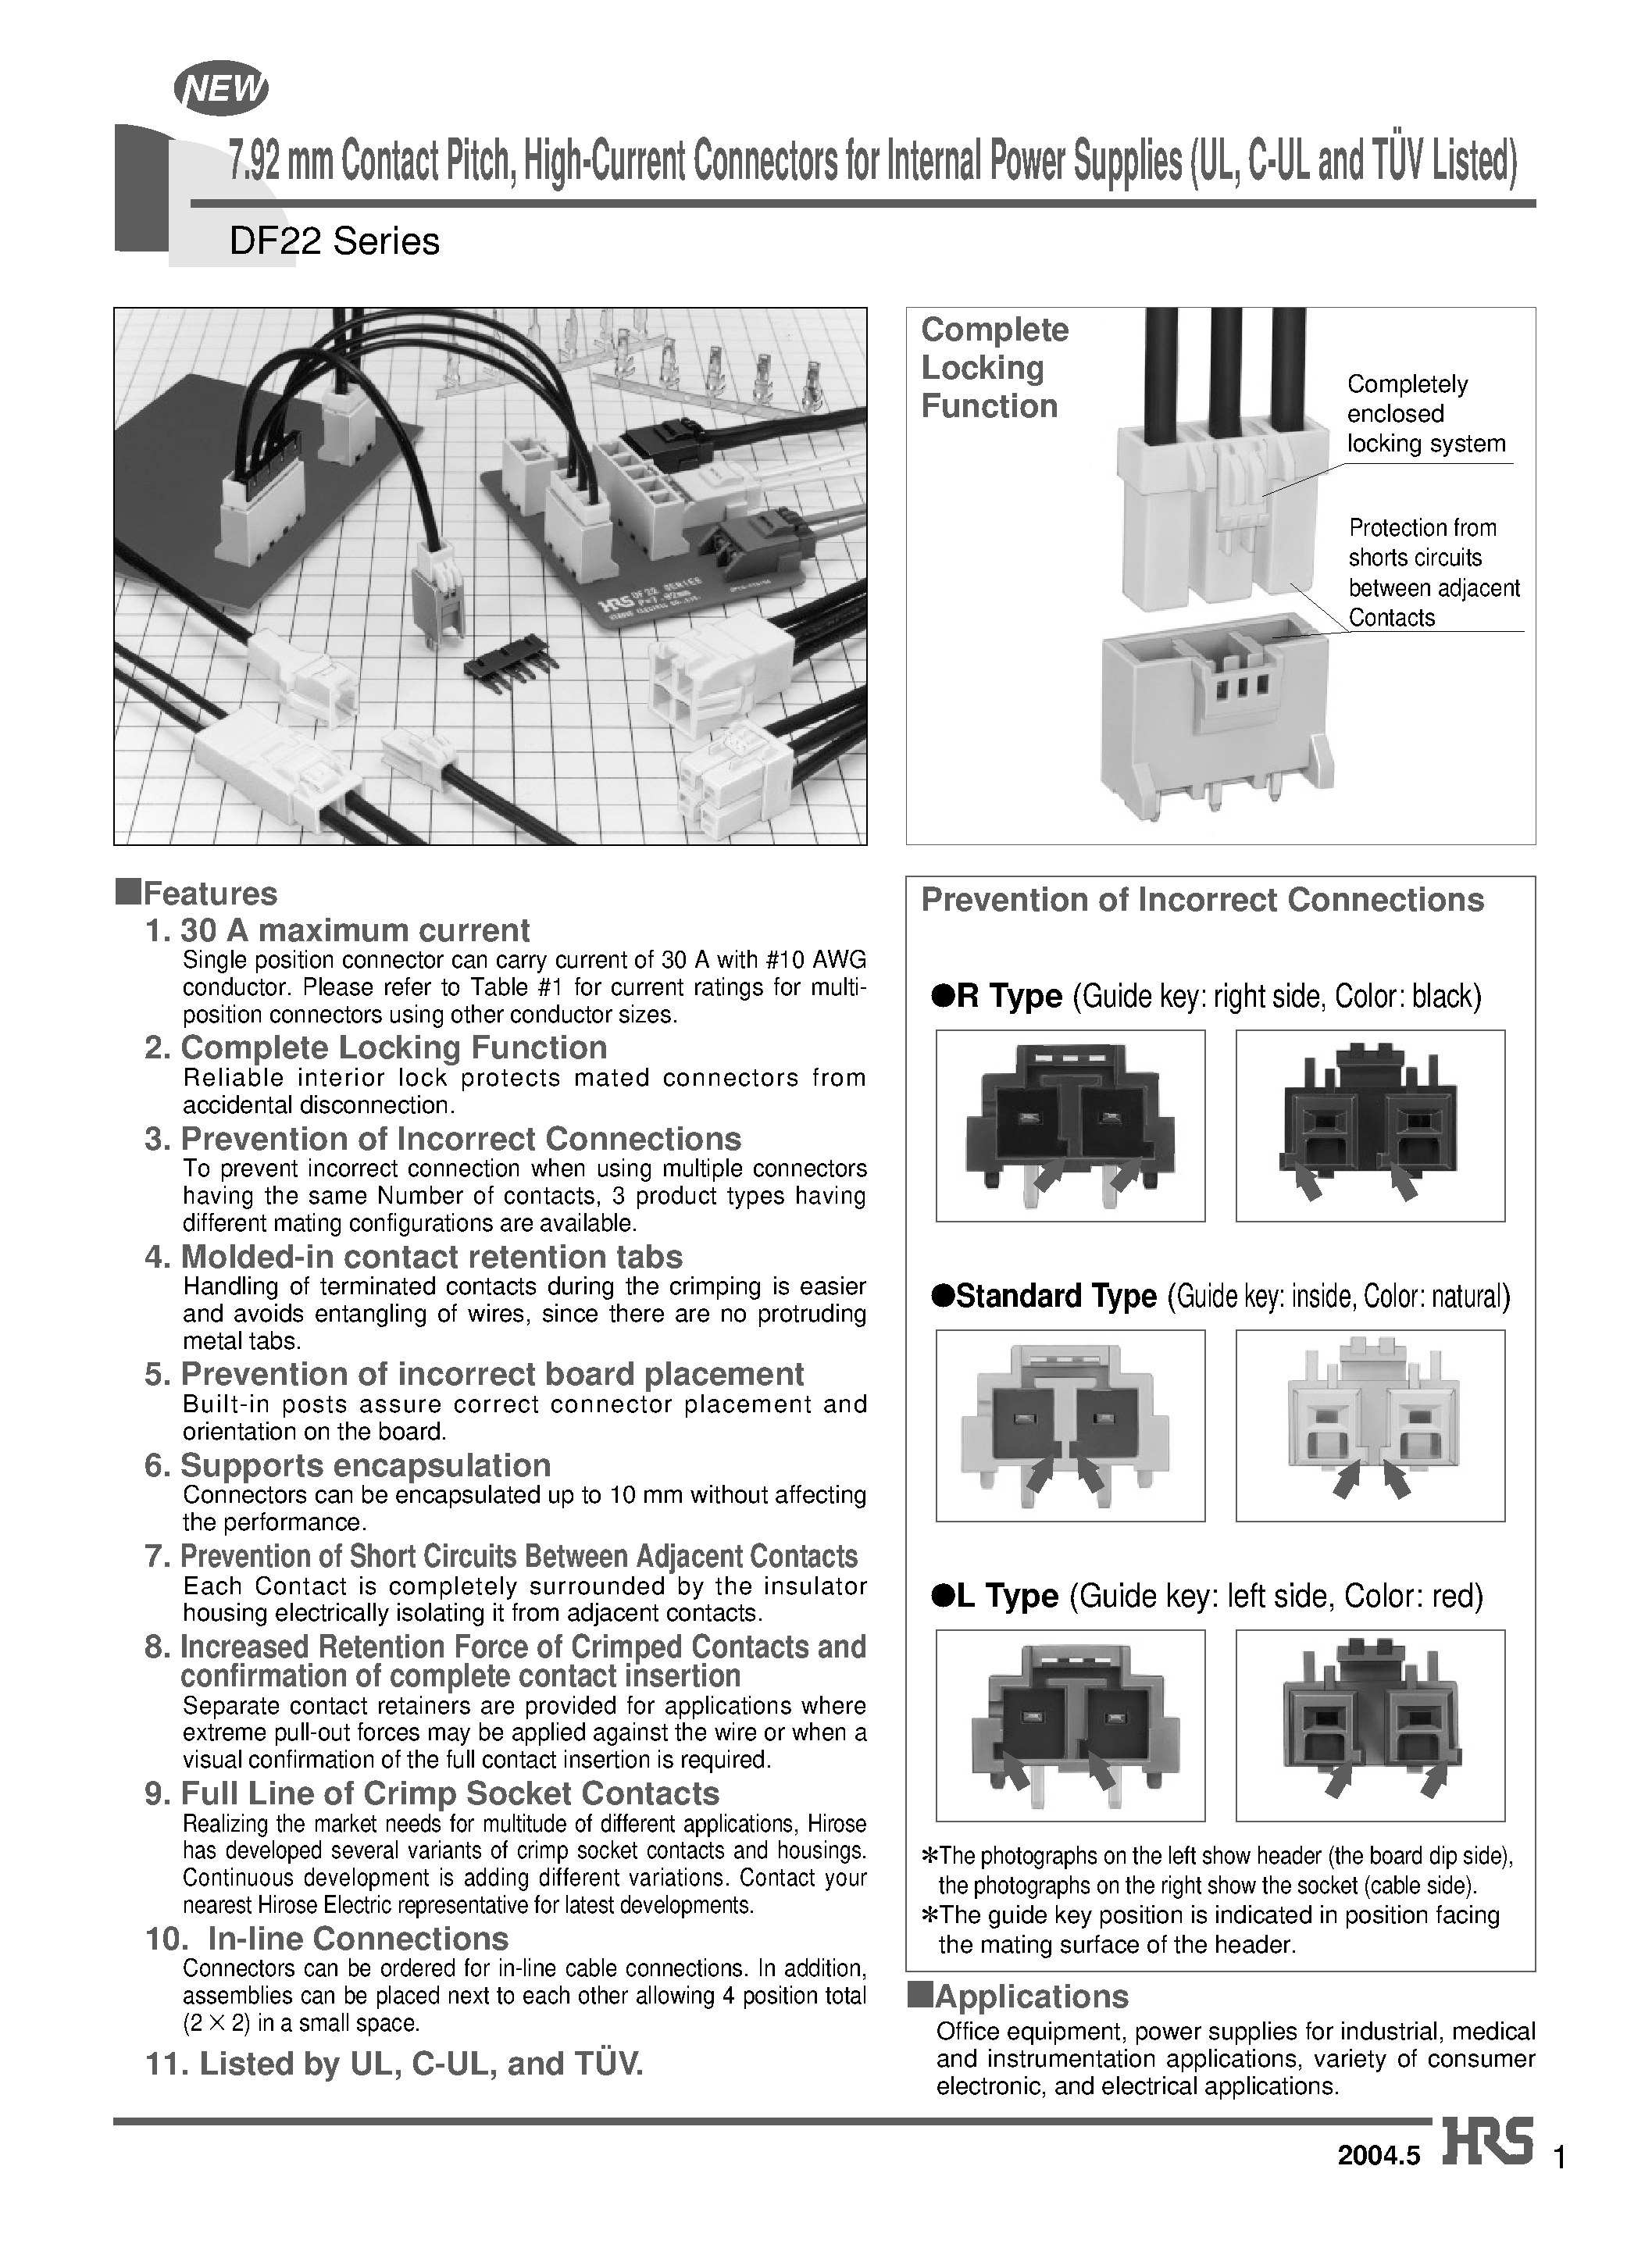 Даташит DF22AL-2S-7.92C - 7.92 mm Contact Pitch/ High-Current Connectors for Internal Power Supplies (UL/ C-UL and TUV Listed) страница 1